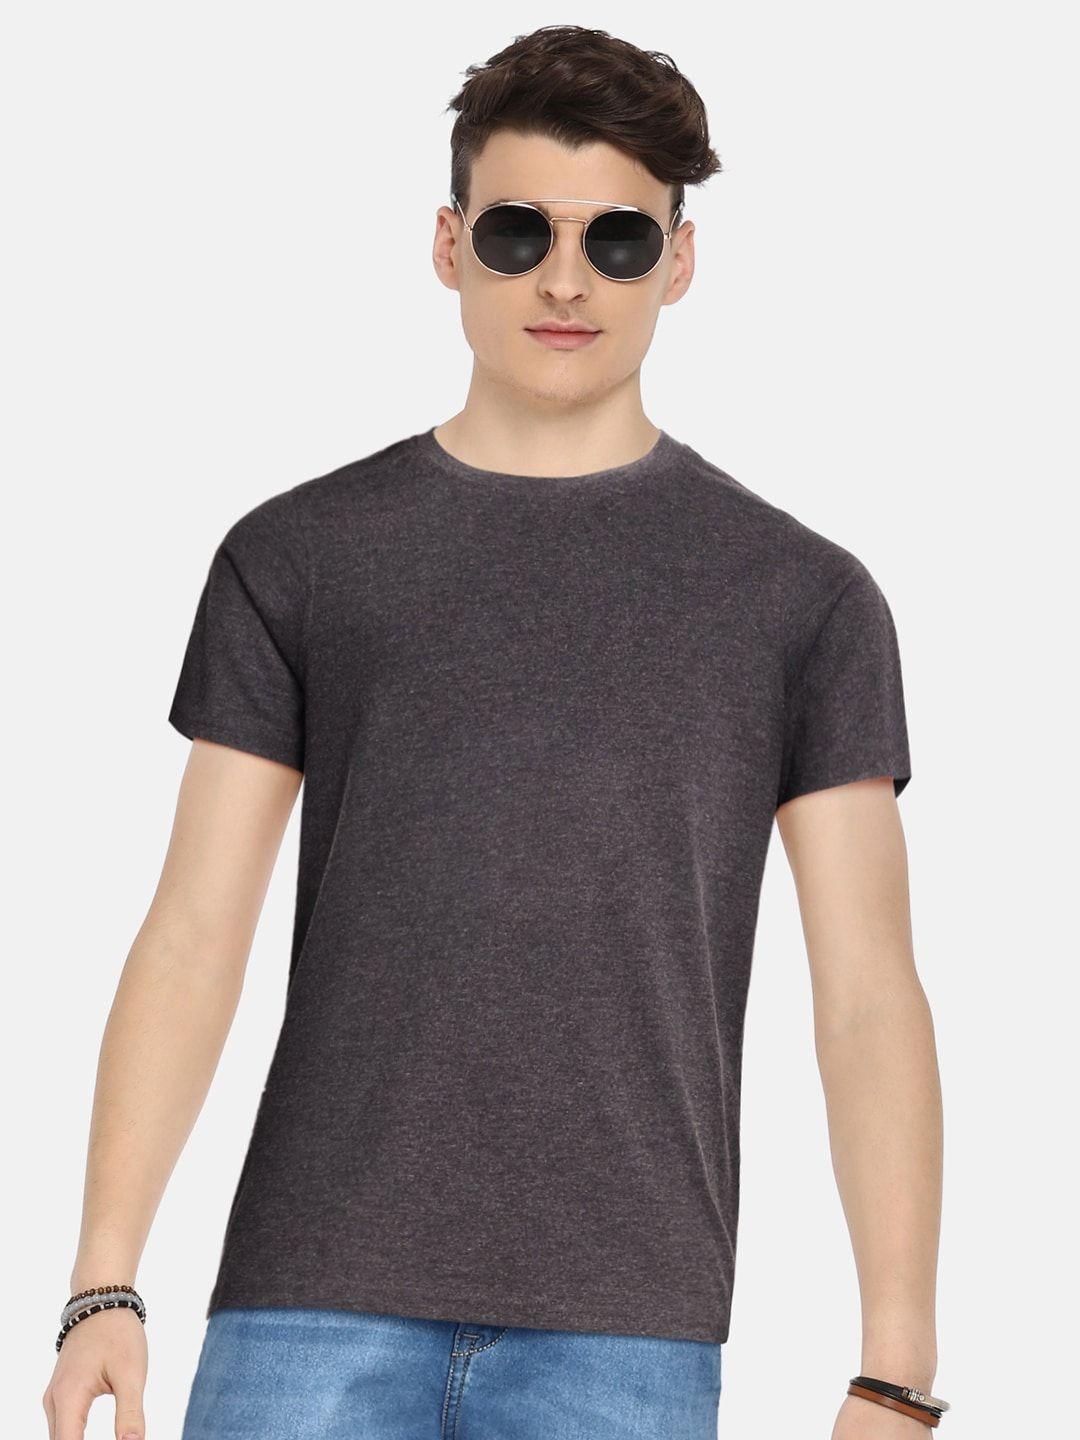 uth by roadster boys charcoal grey t-shirt